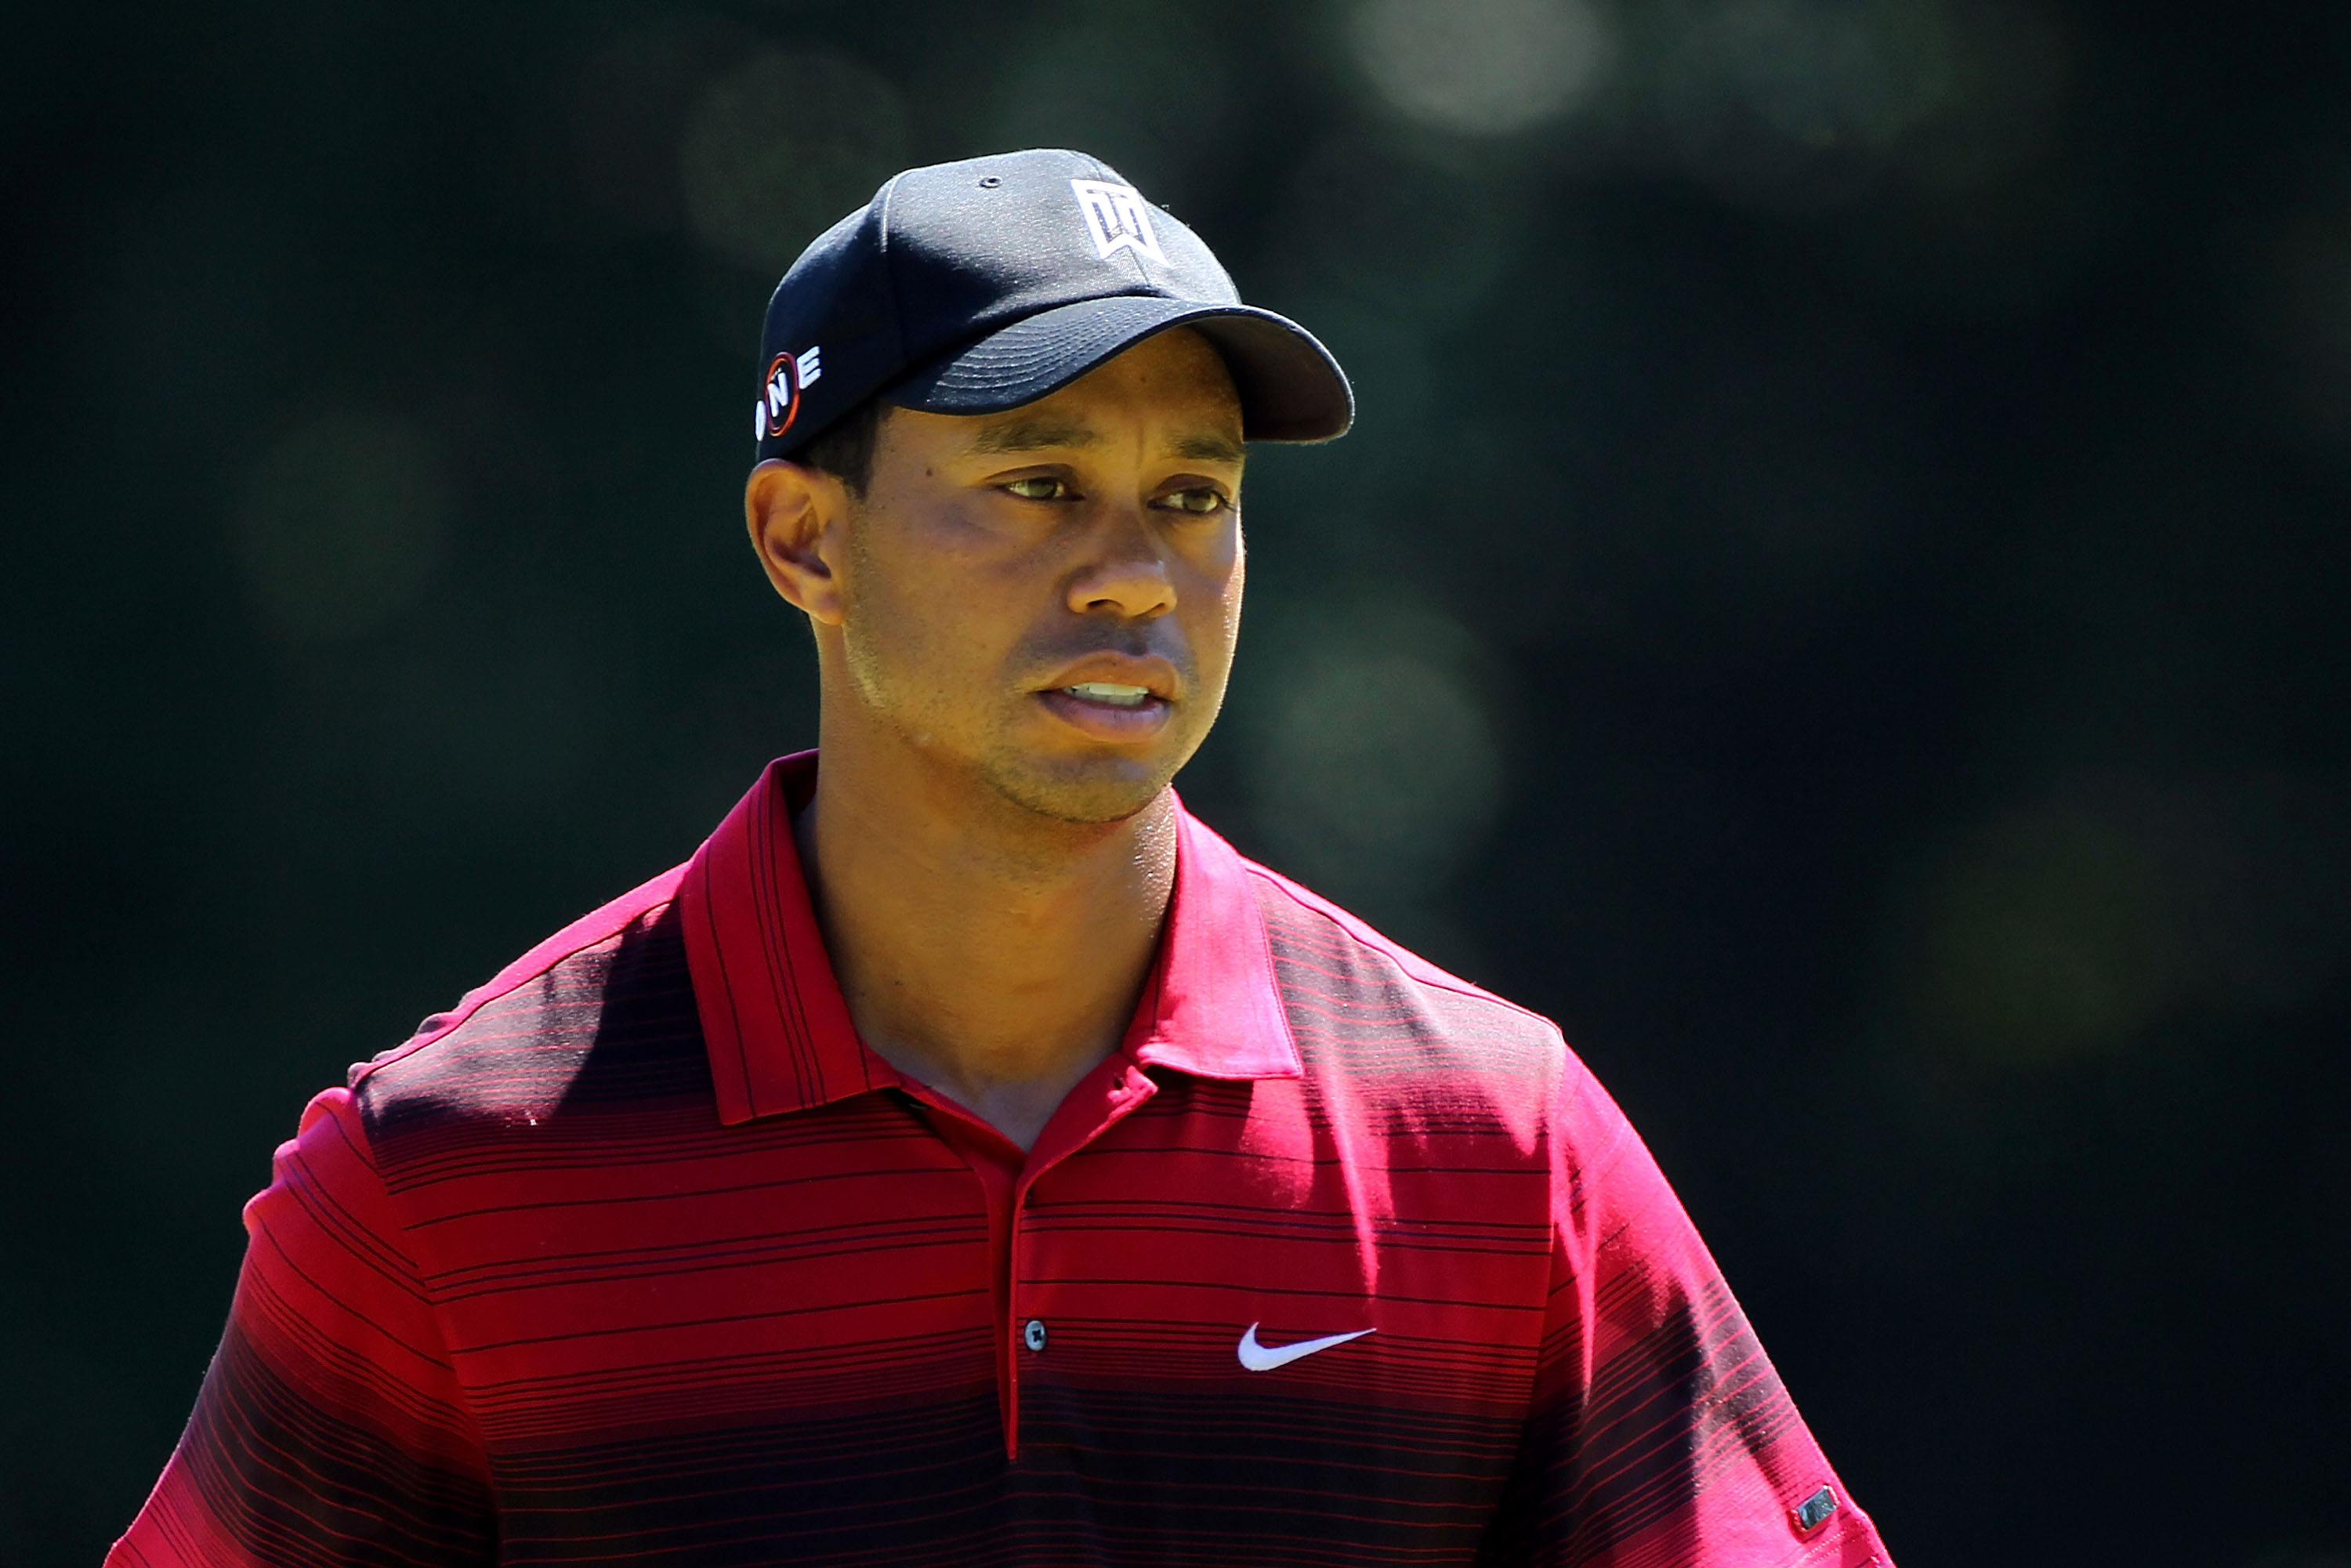 PARAMUS, NJ - AUGUST 29:  Tiger Woods looks on from the fourth green during the final round of The Barclays at the Ridgewood Country Club on August 29, 2010 in Paramus, New Jersey.  (Photo by Hunter Martin/Getty Images)